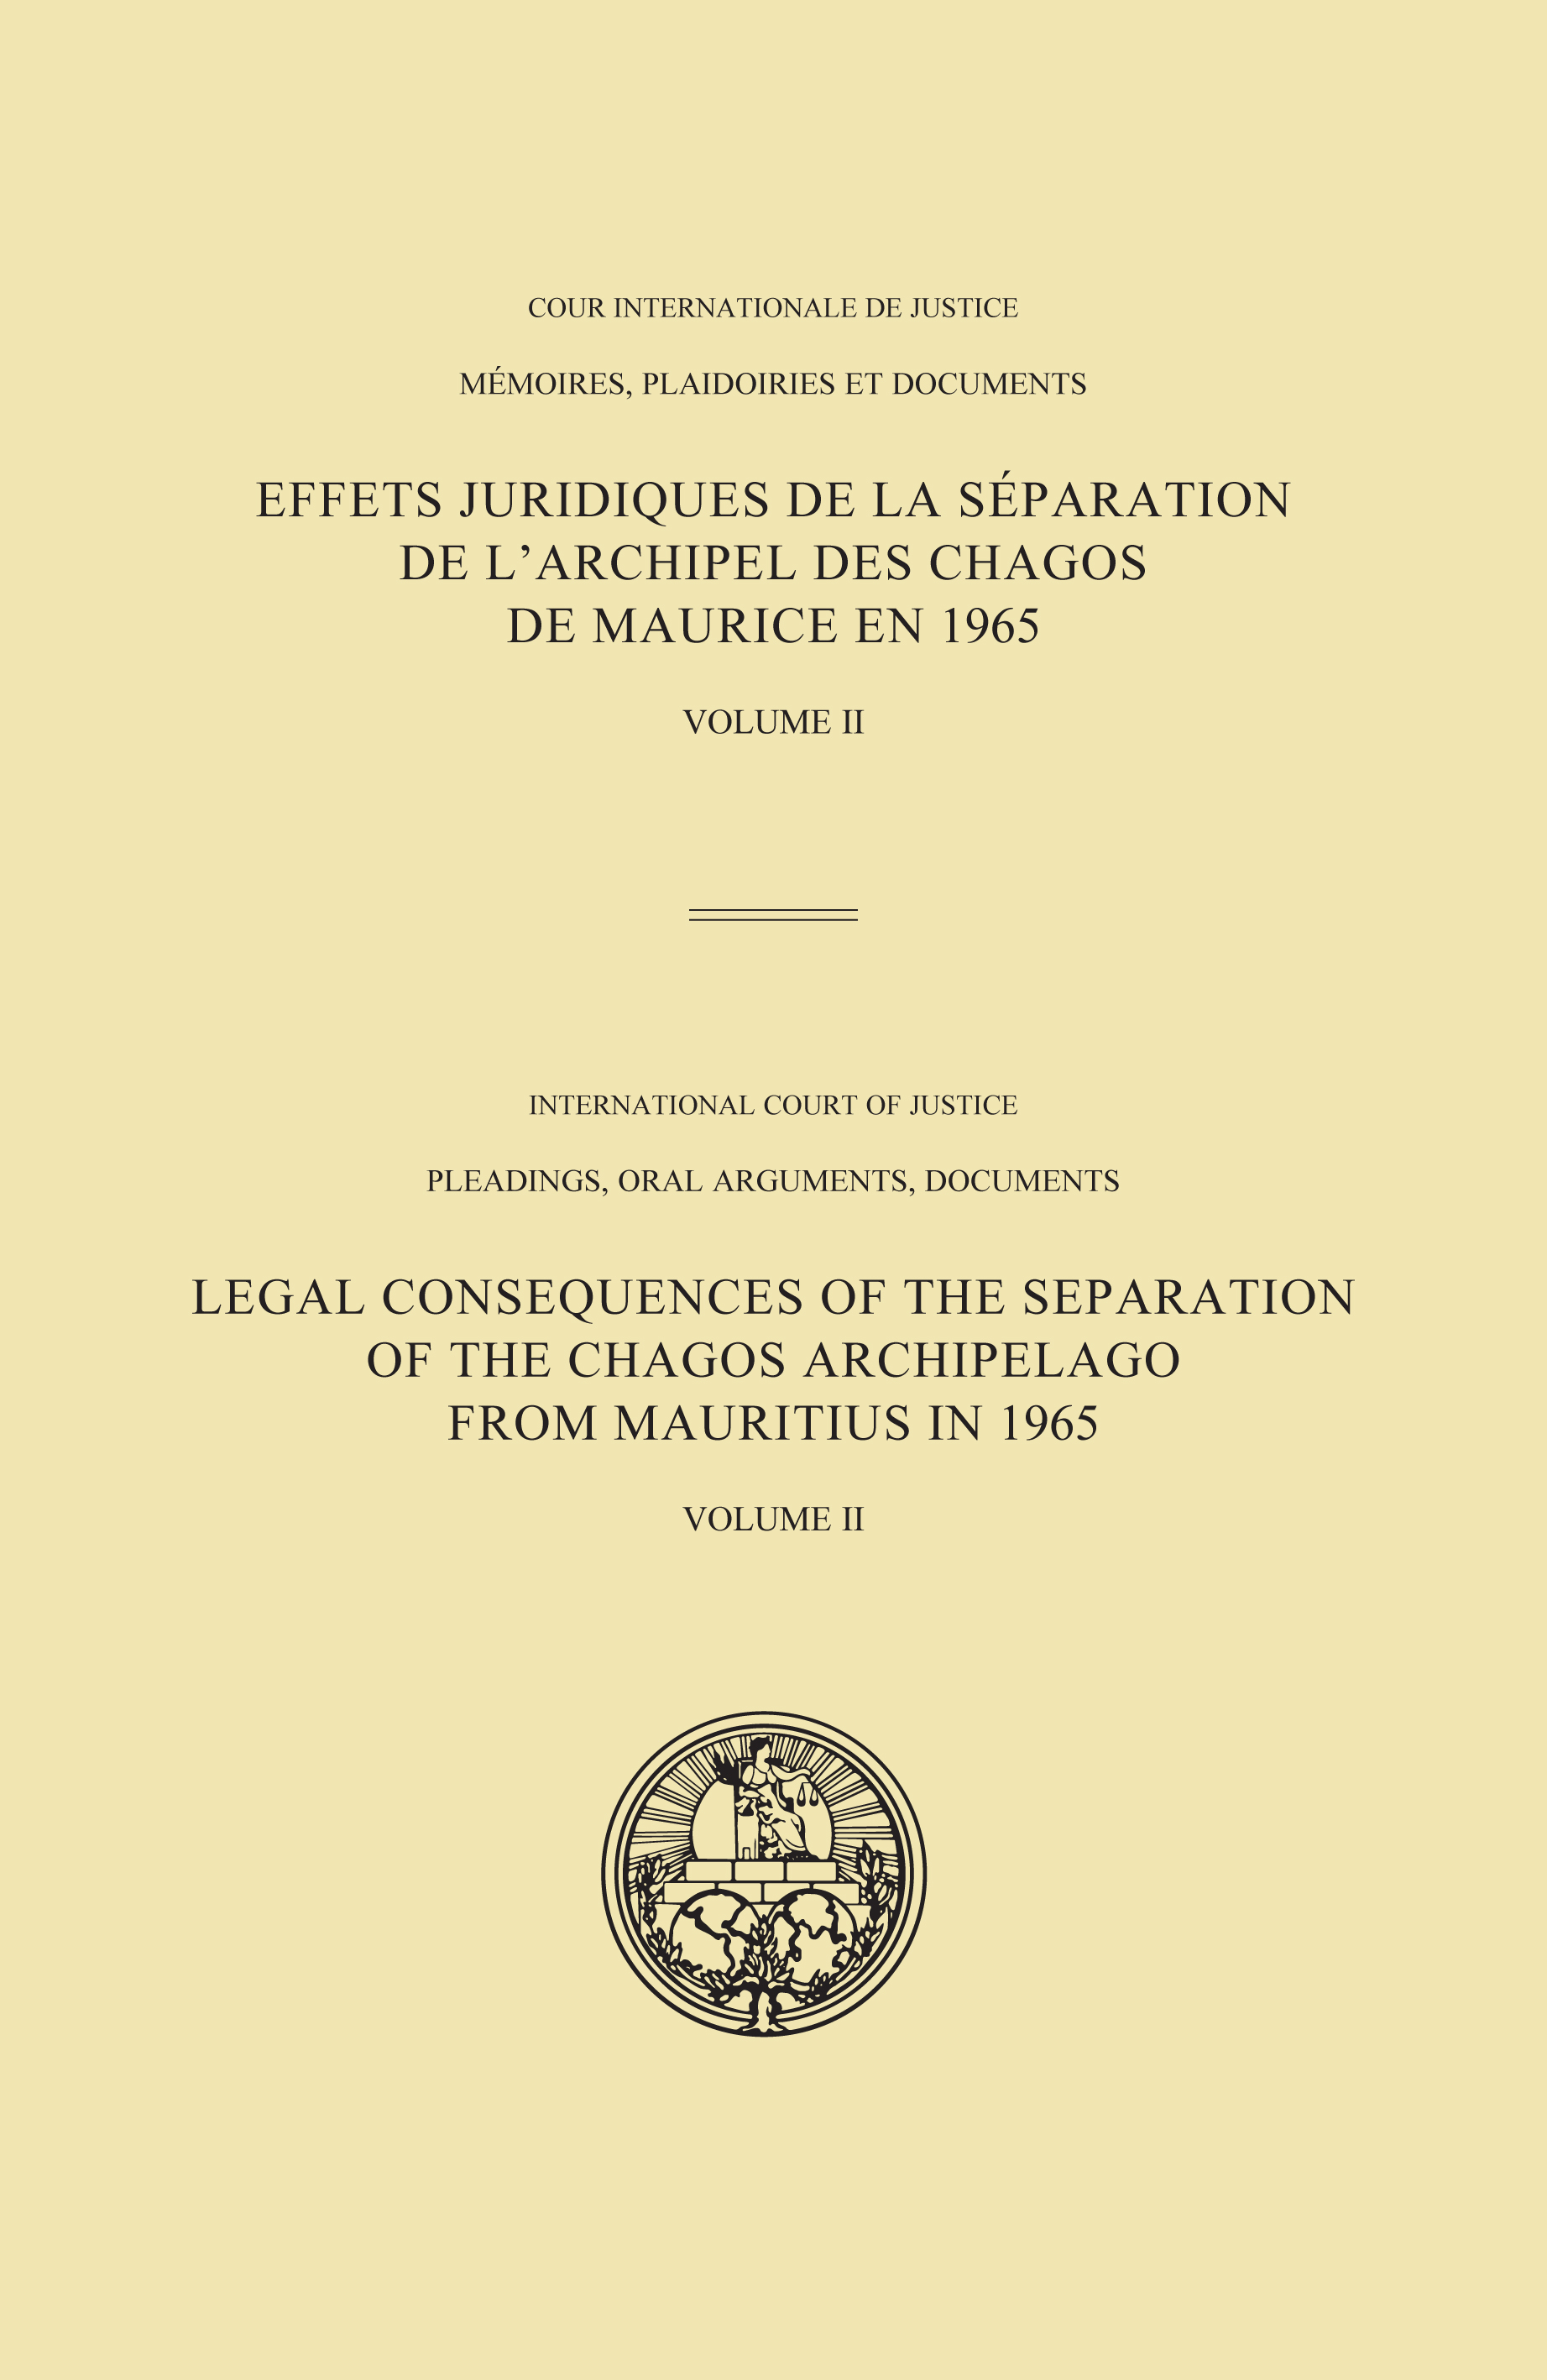 image of Legal Consequences of the Separation of the Chagos Archipelago from Mauritius in 1965, Volume II